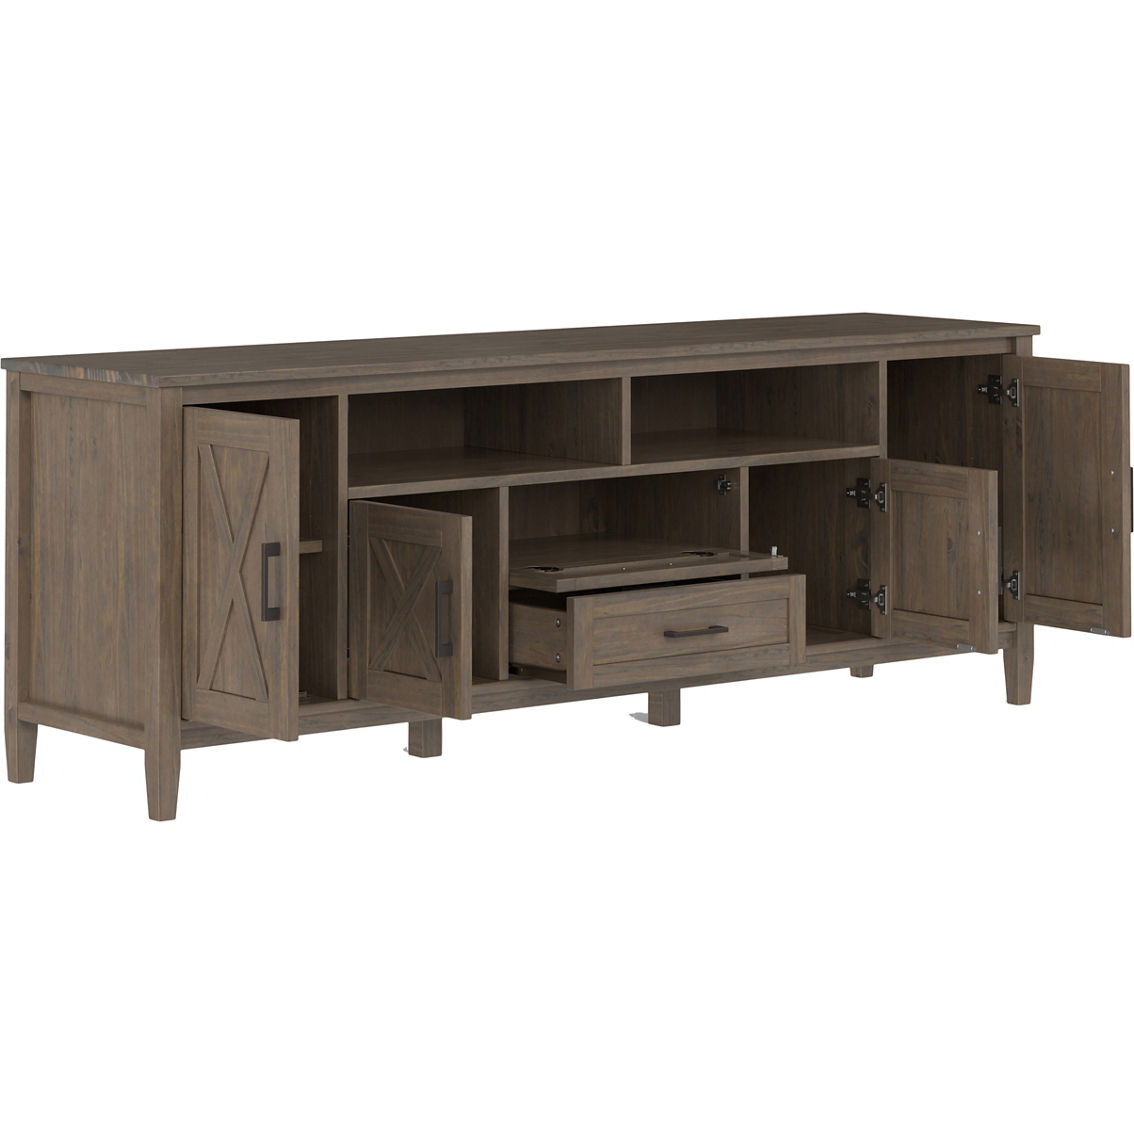 Simpli Home Ela Solid Wood 72 in. TV Media Stand for TVs up to 80 in. - Image 3 of 5